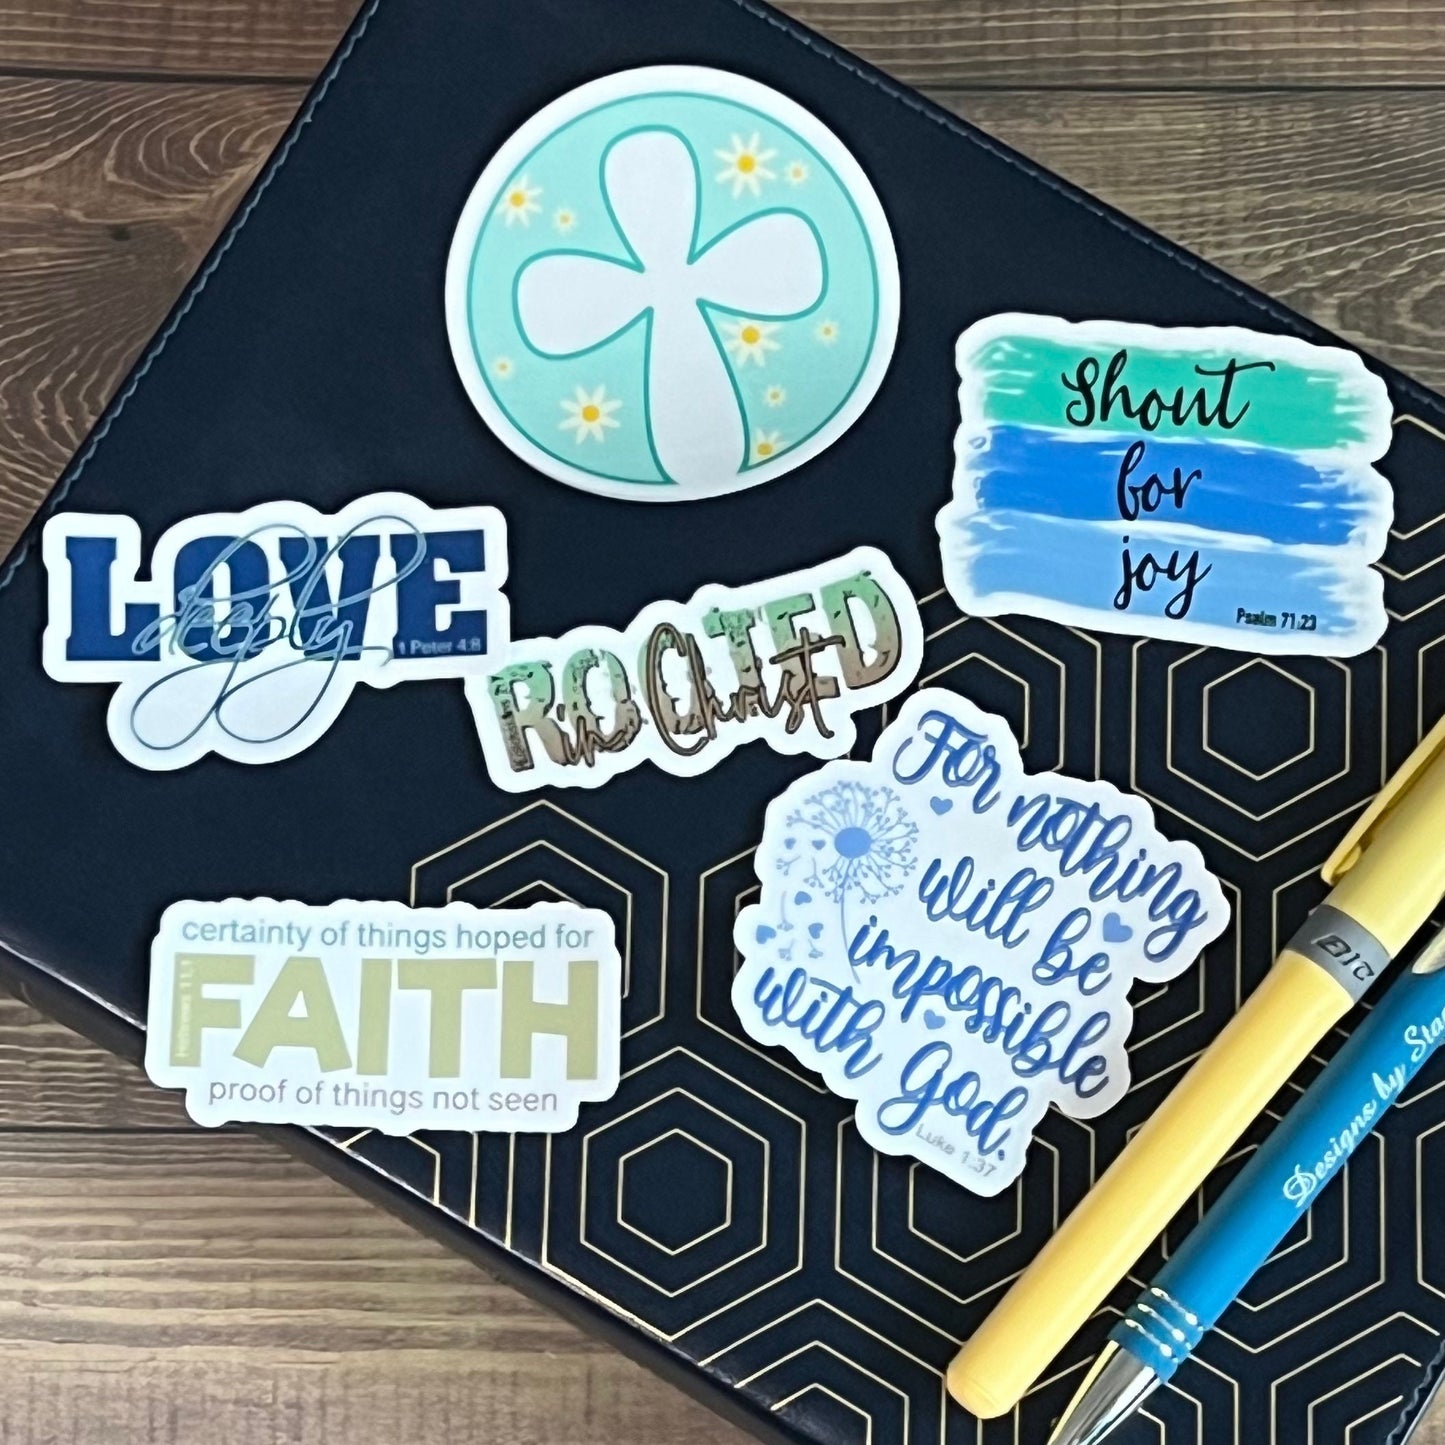 Christian Sticker Pack, Six Faith Stickers, Religious Decals, Bible Verse Stickers, Waterproof Sticker Bundle, Pack 2289